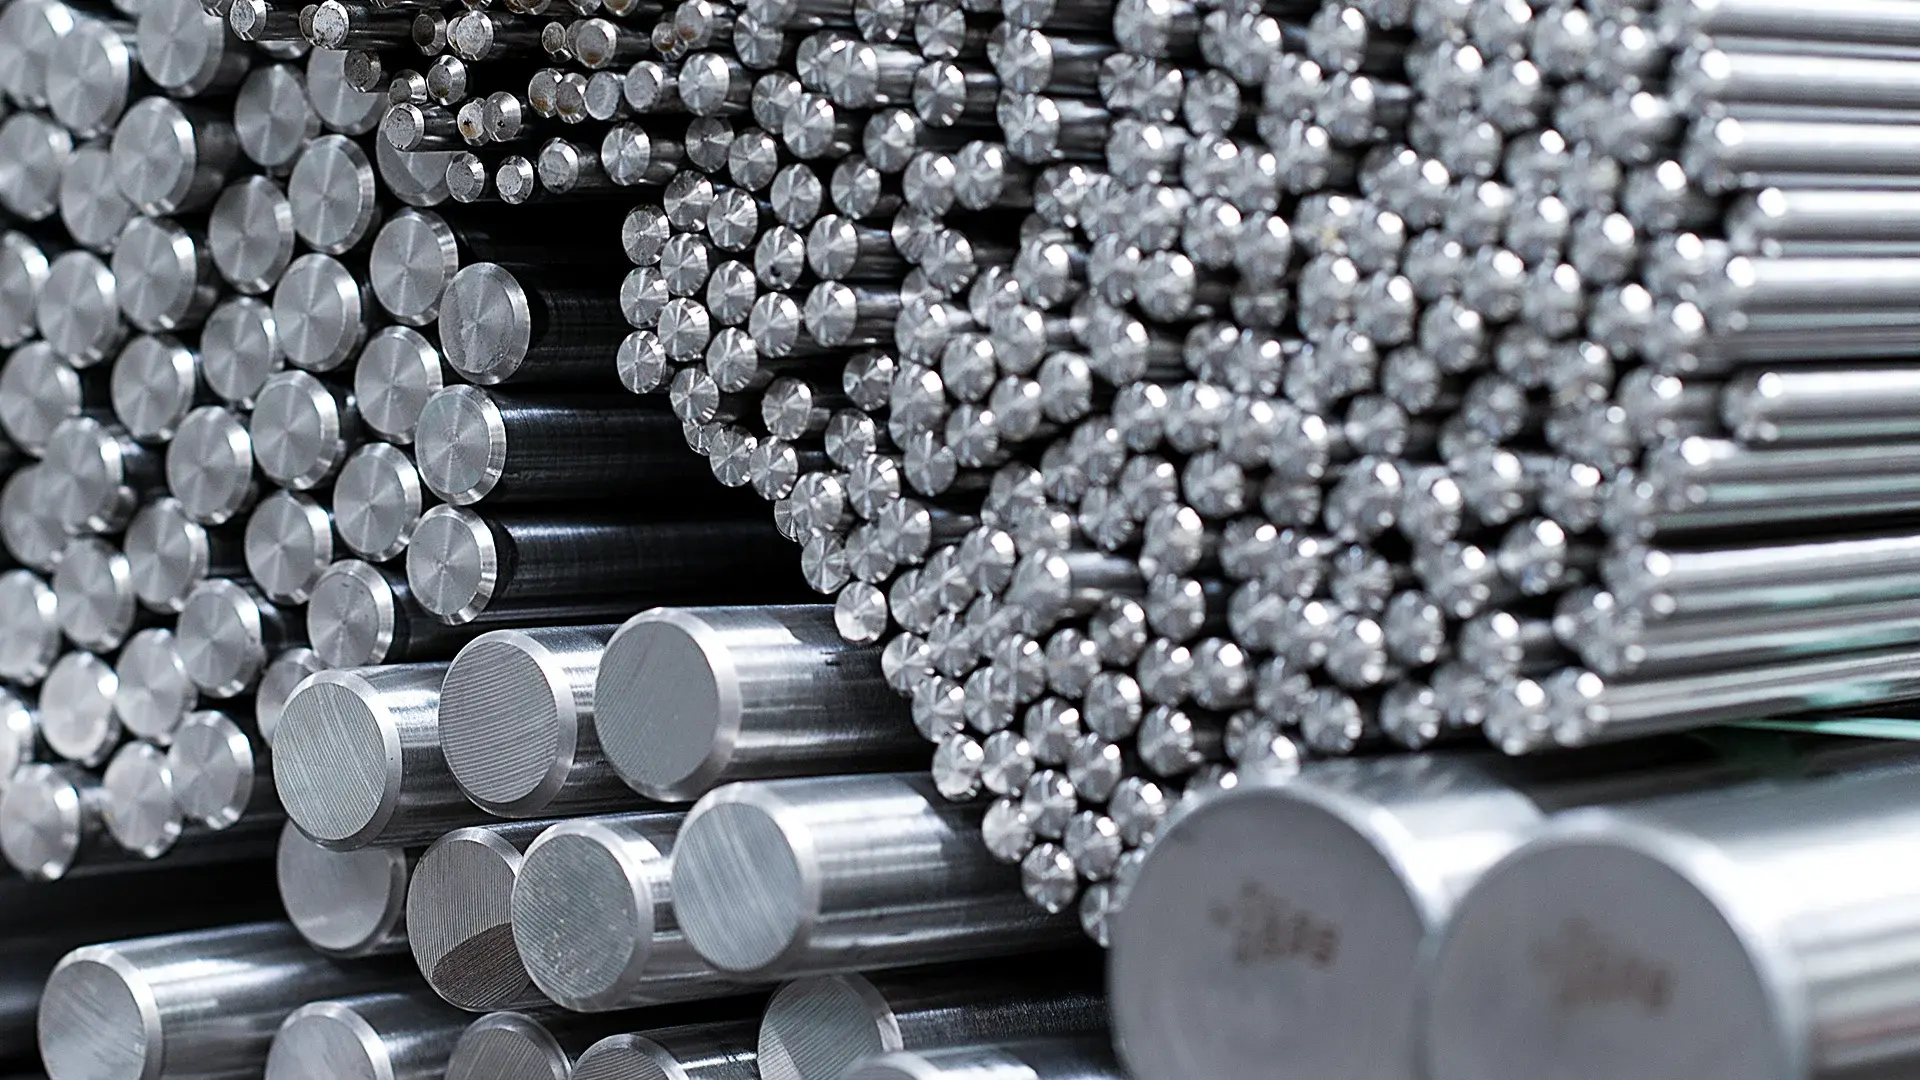 Stainless steel bars with high strength and corrosion resistance.